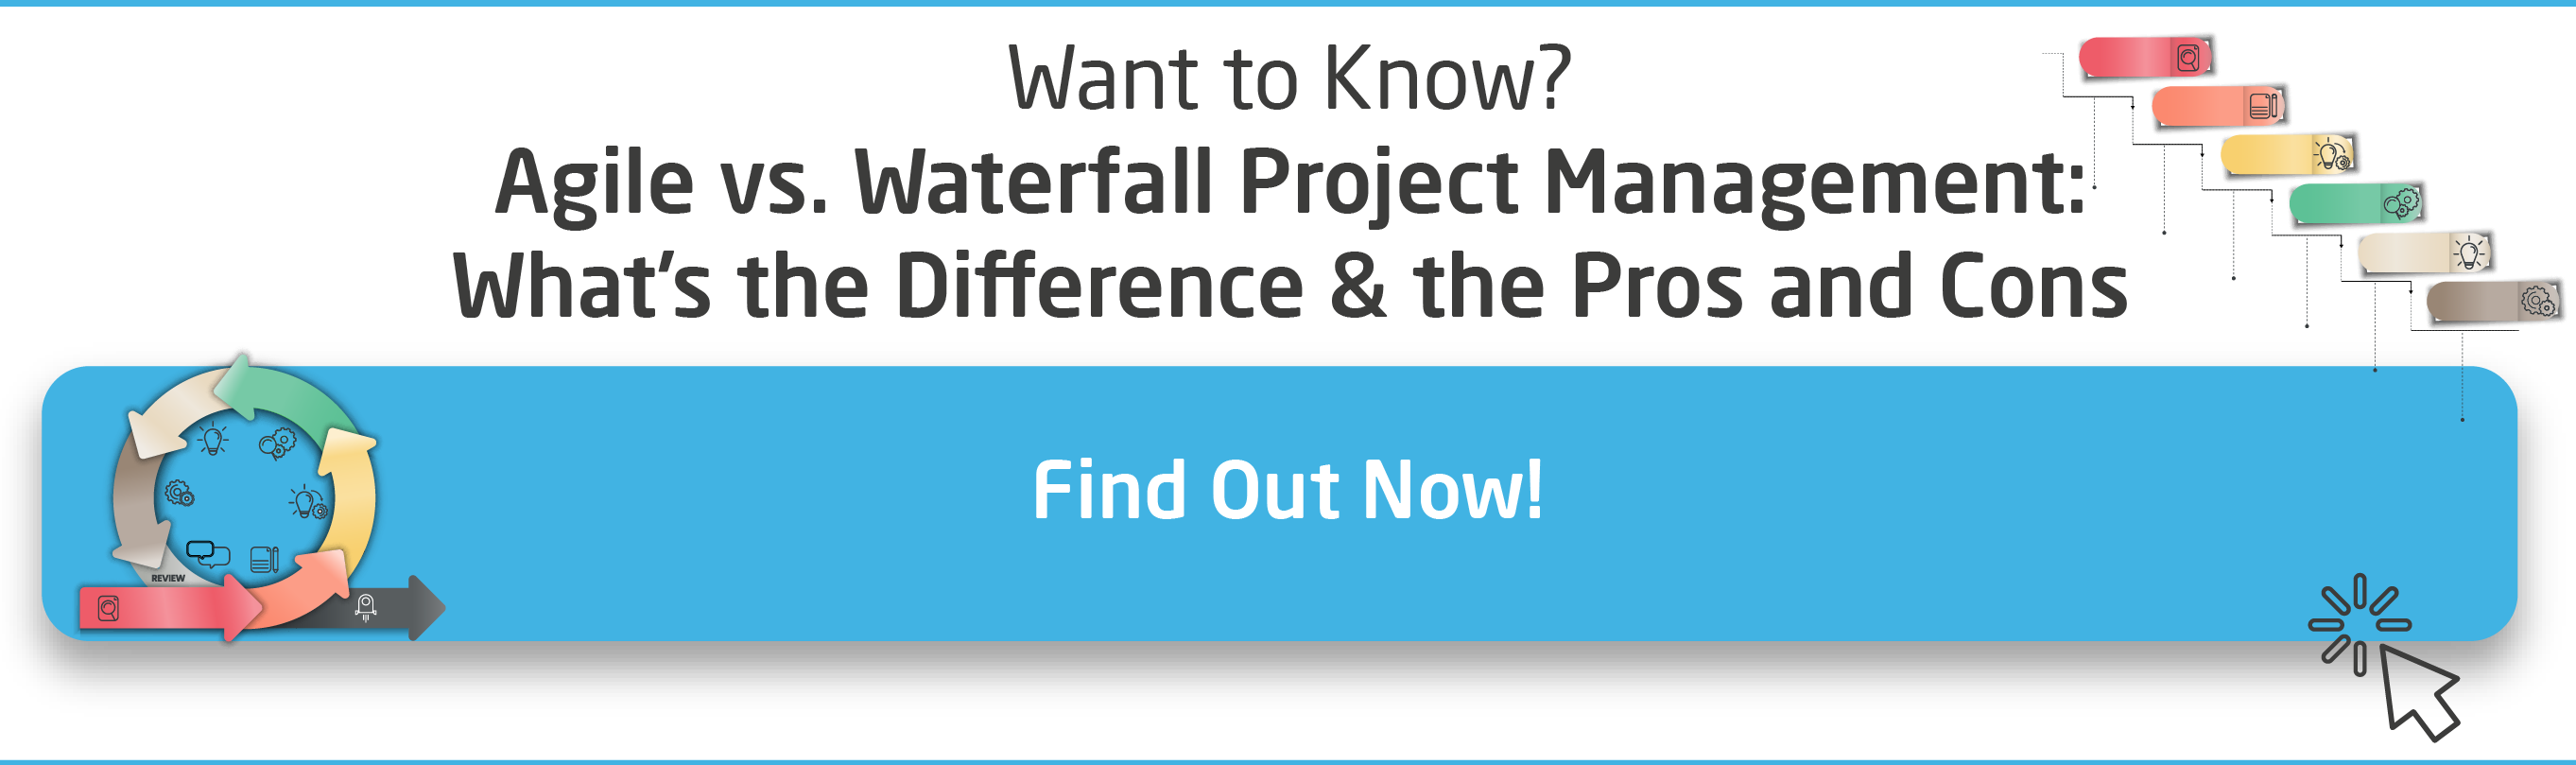 nArticle_Agile-vs-waterfall-project-management-benefits-and-drawbacks